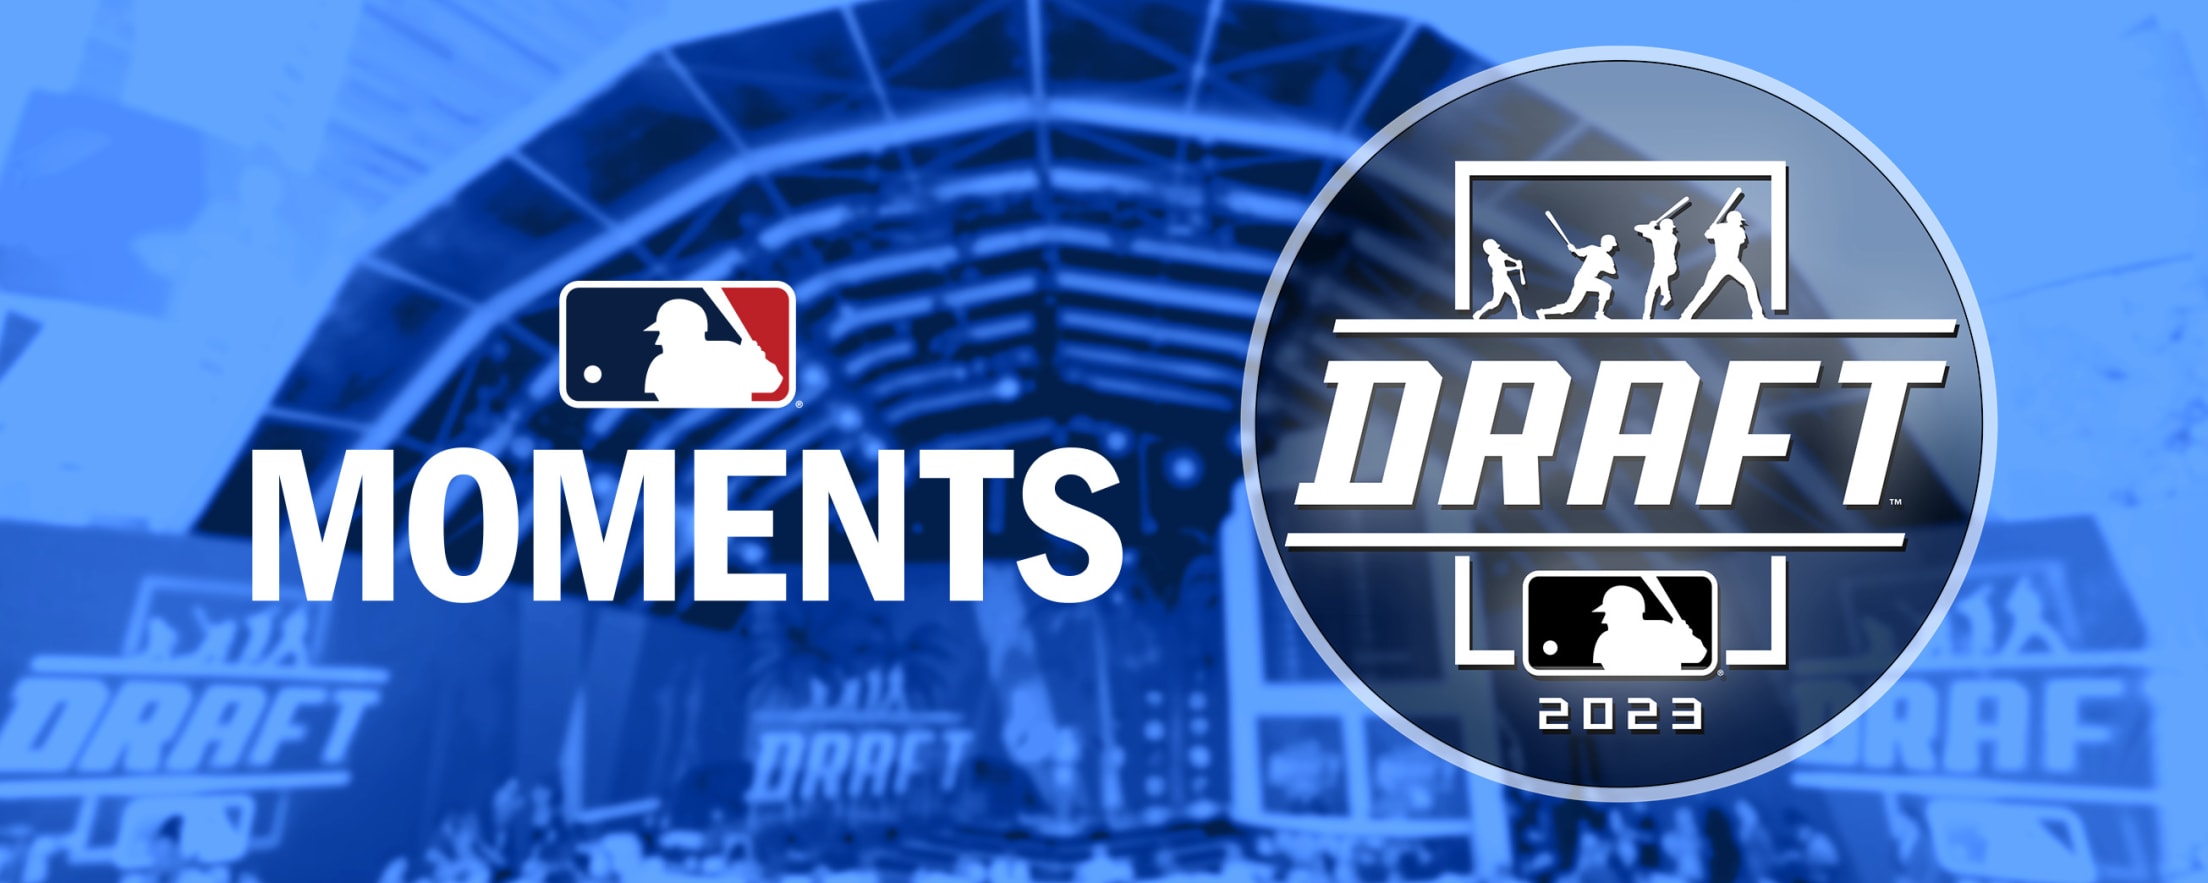 MLB Draft Day Experience Sweepstakes Experiences MLB Moments